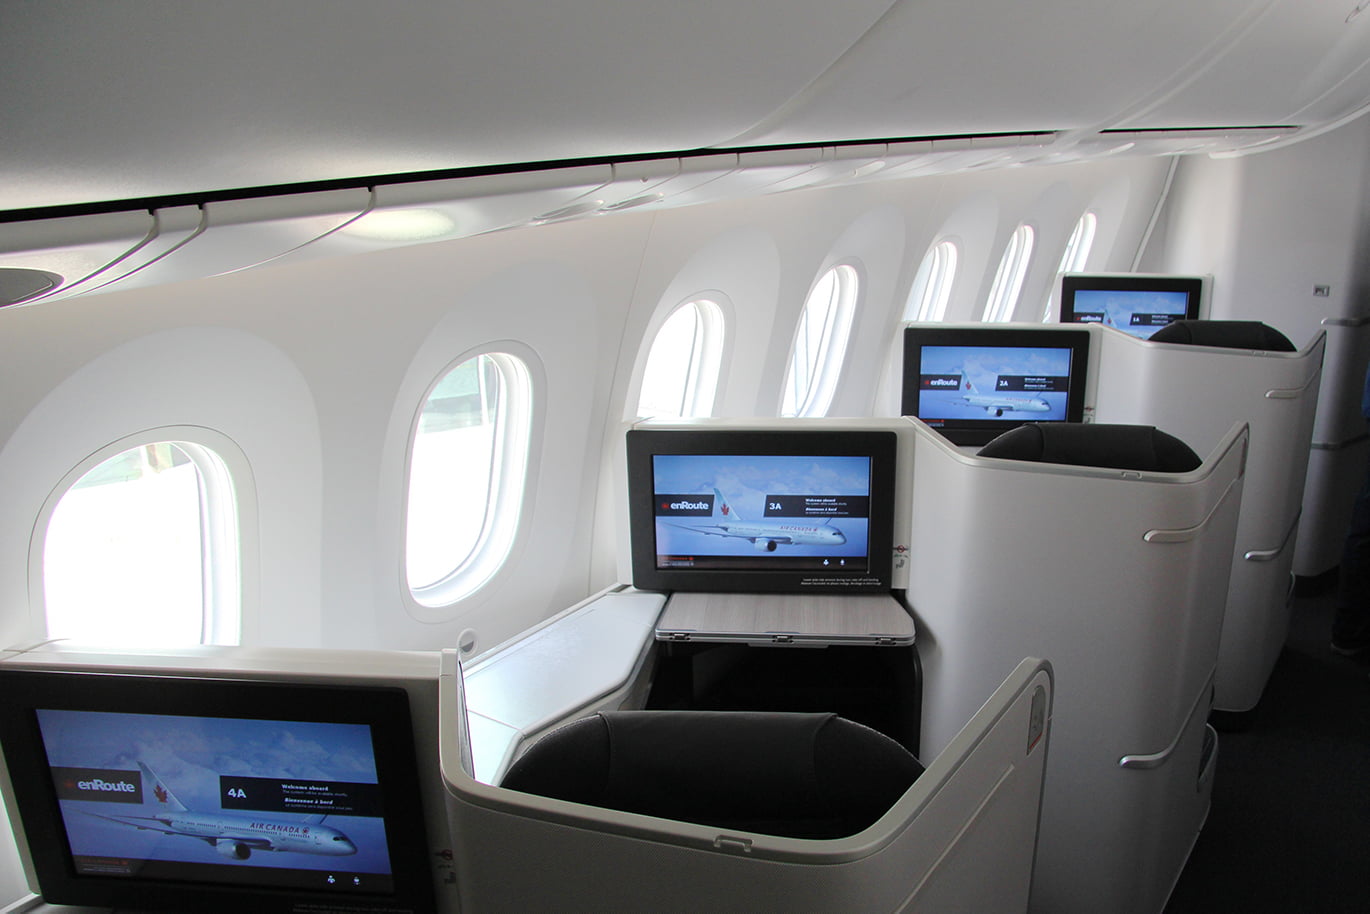 Air Canada Signature Class cabin on the 787 Dreamliner